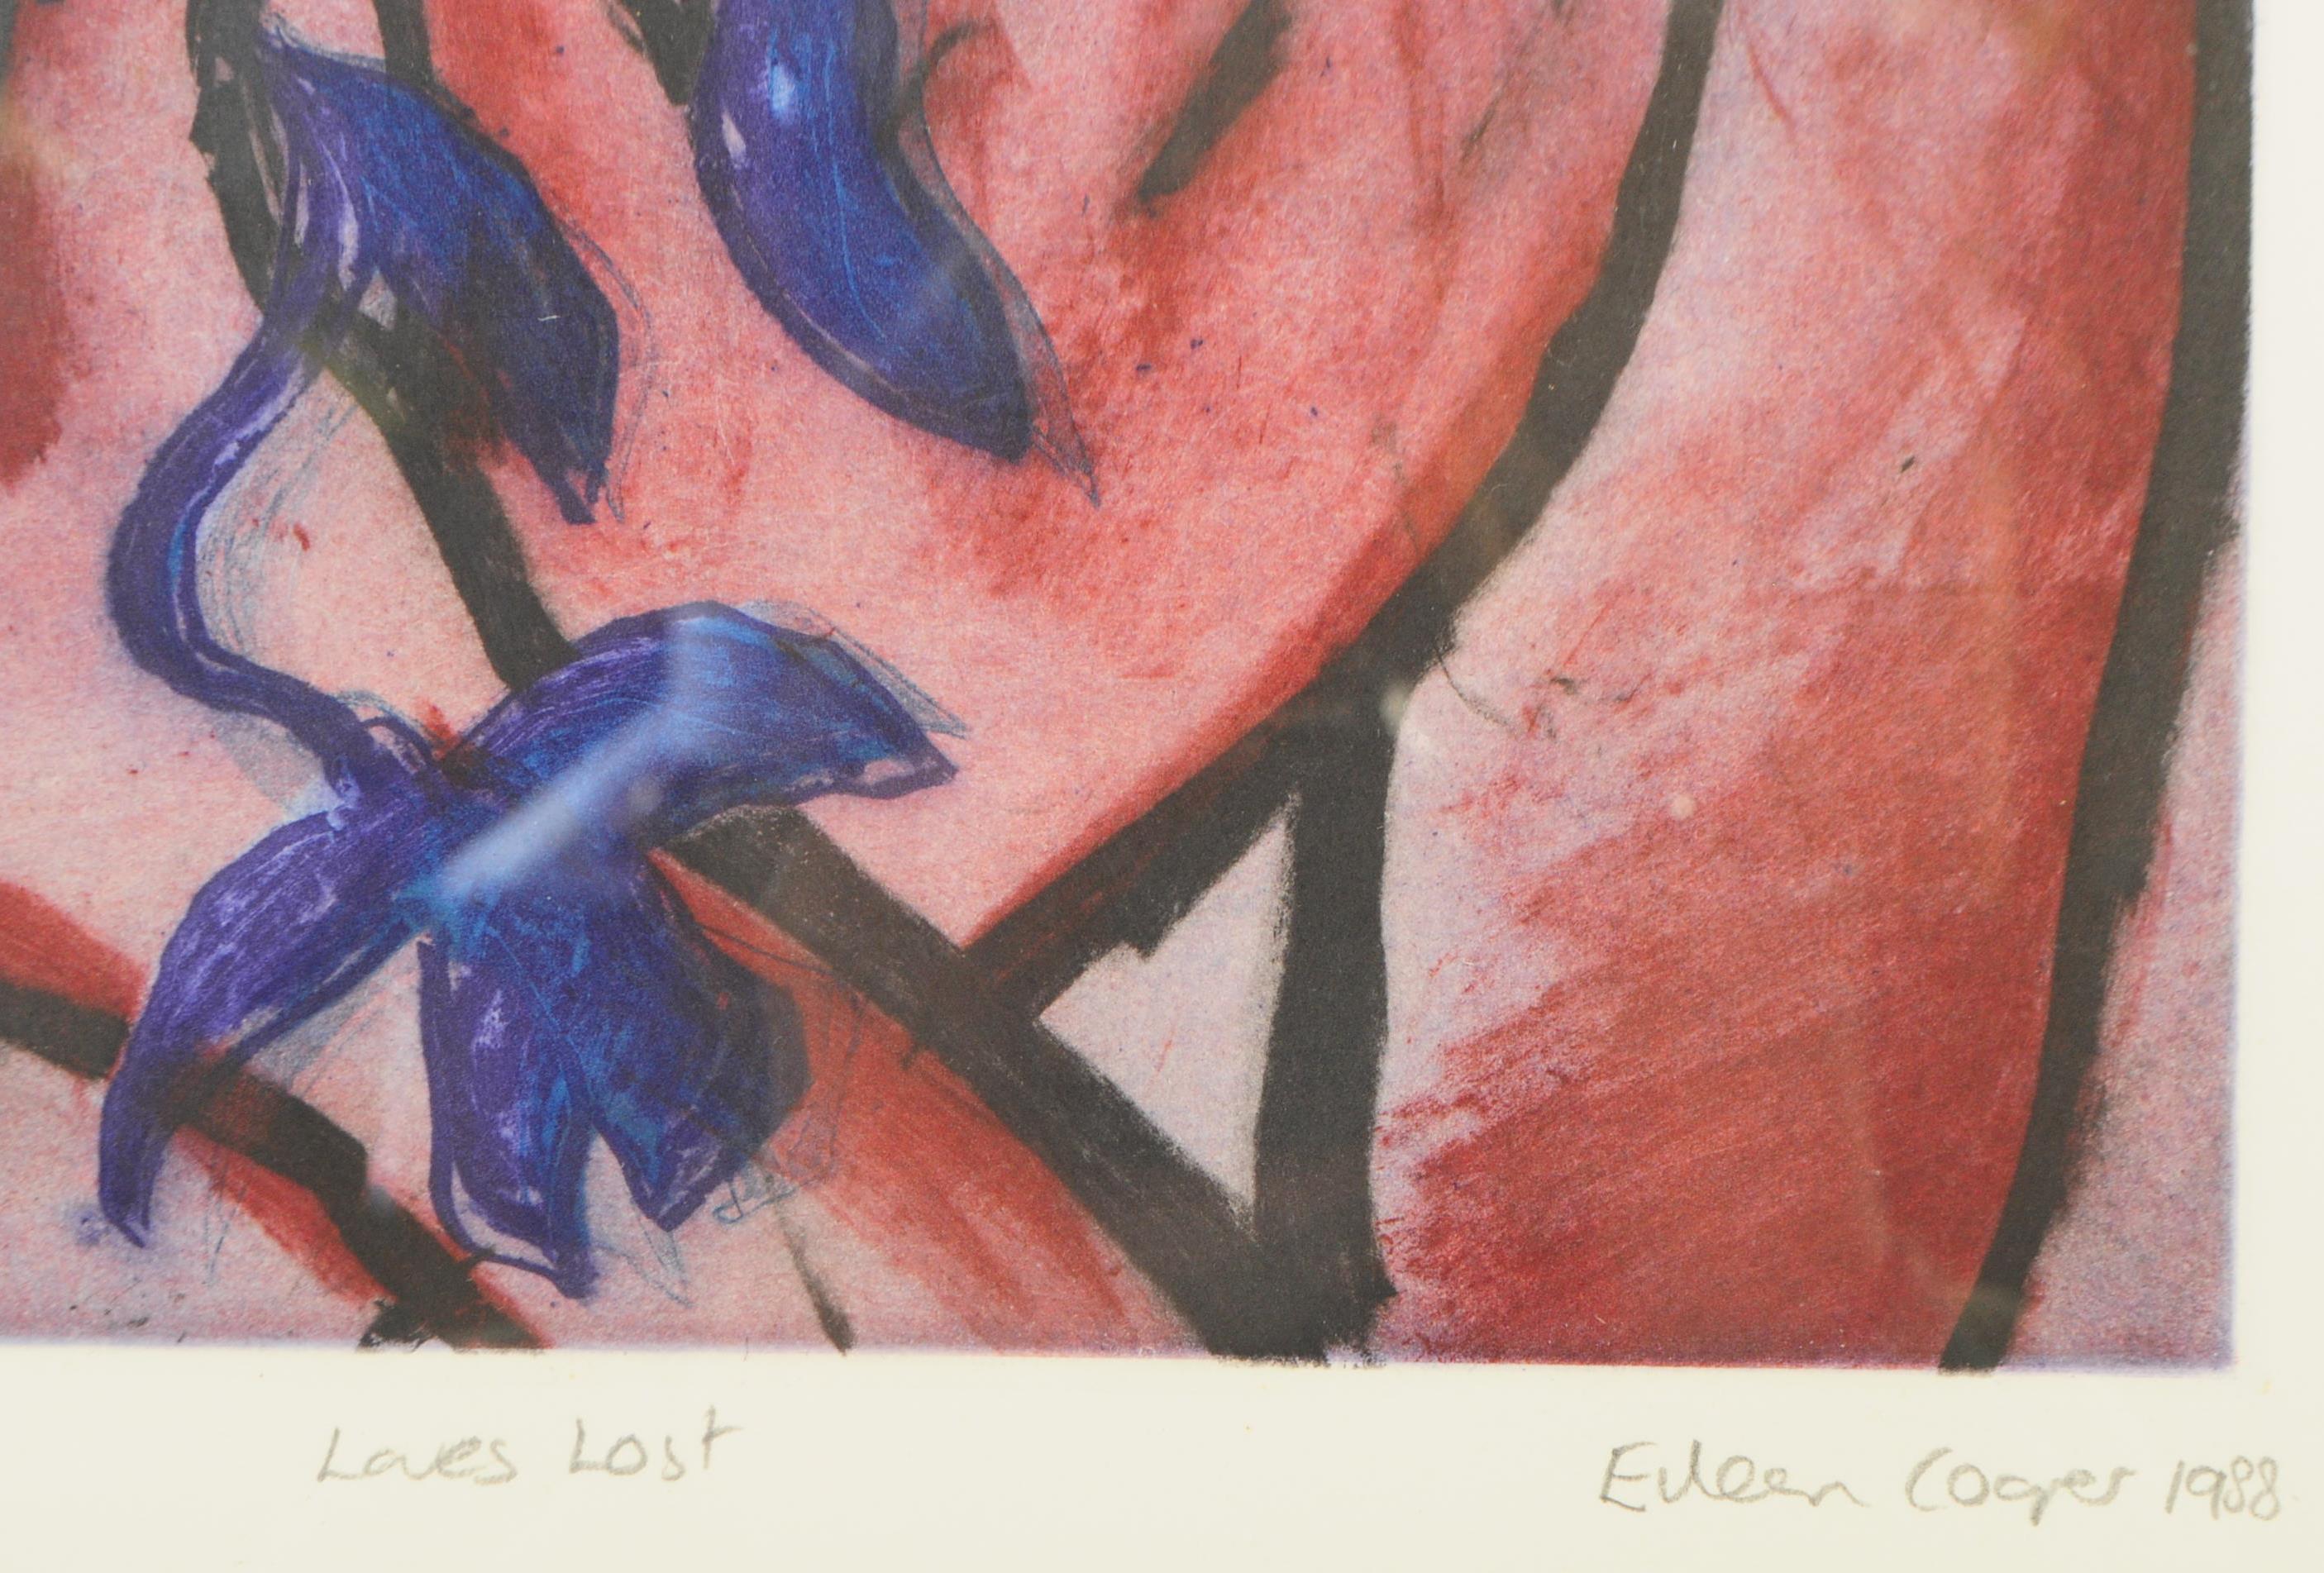 EILEEN COOPER - LOVES LOST - FIRST EDITION ETCHING - Image 4 of 8